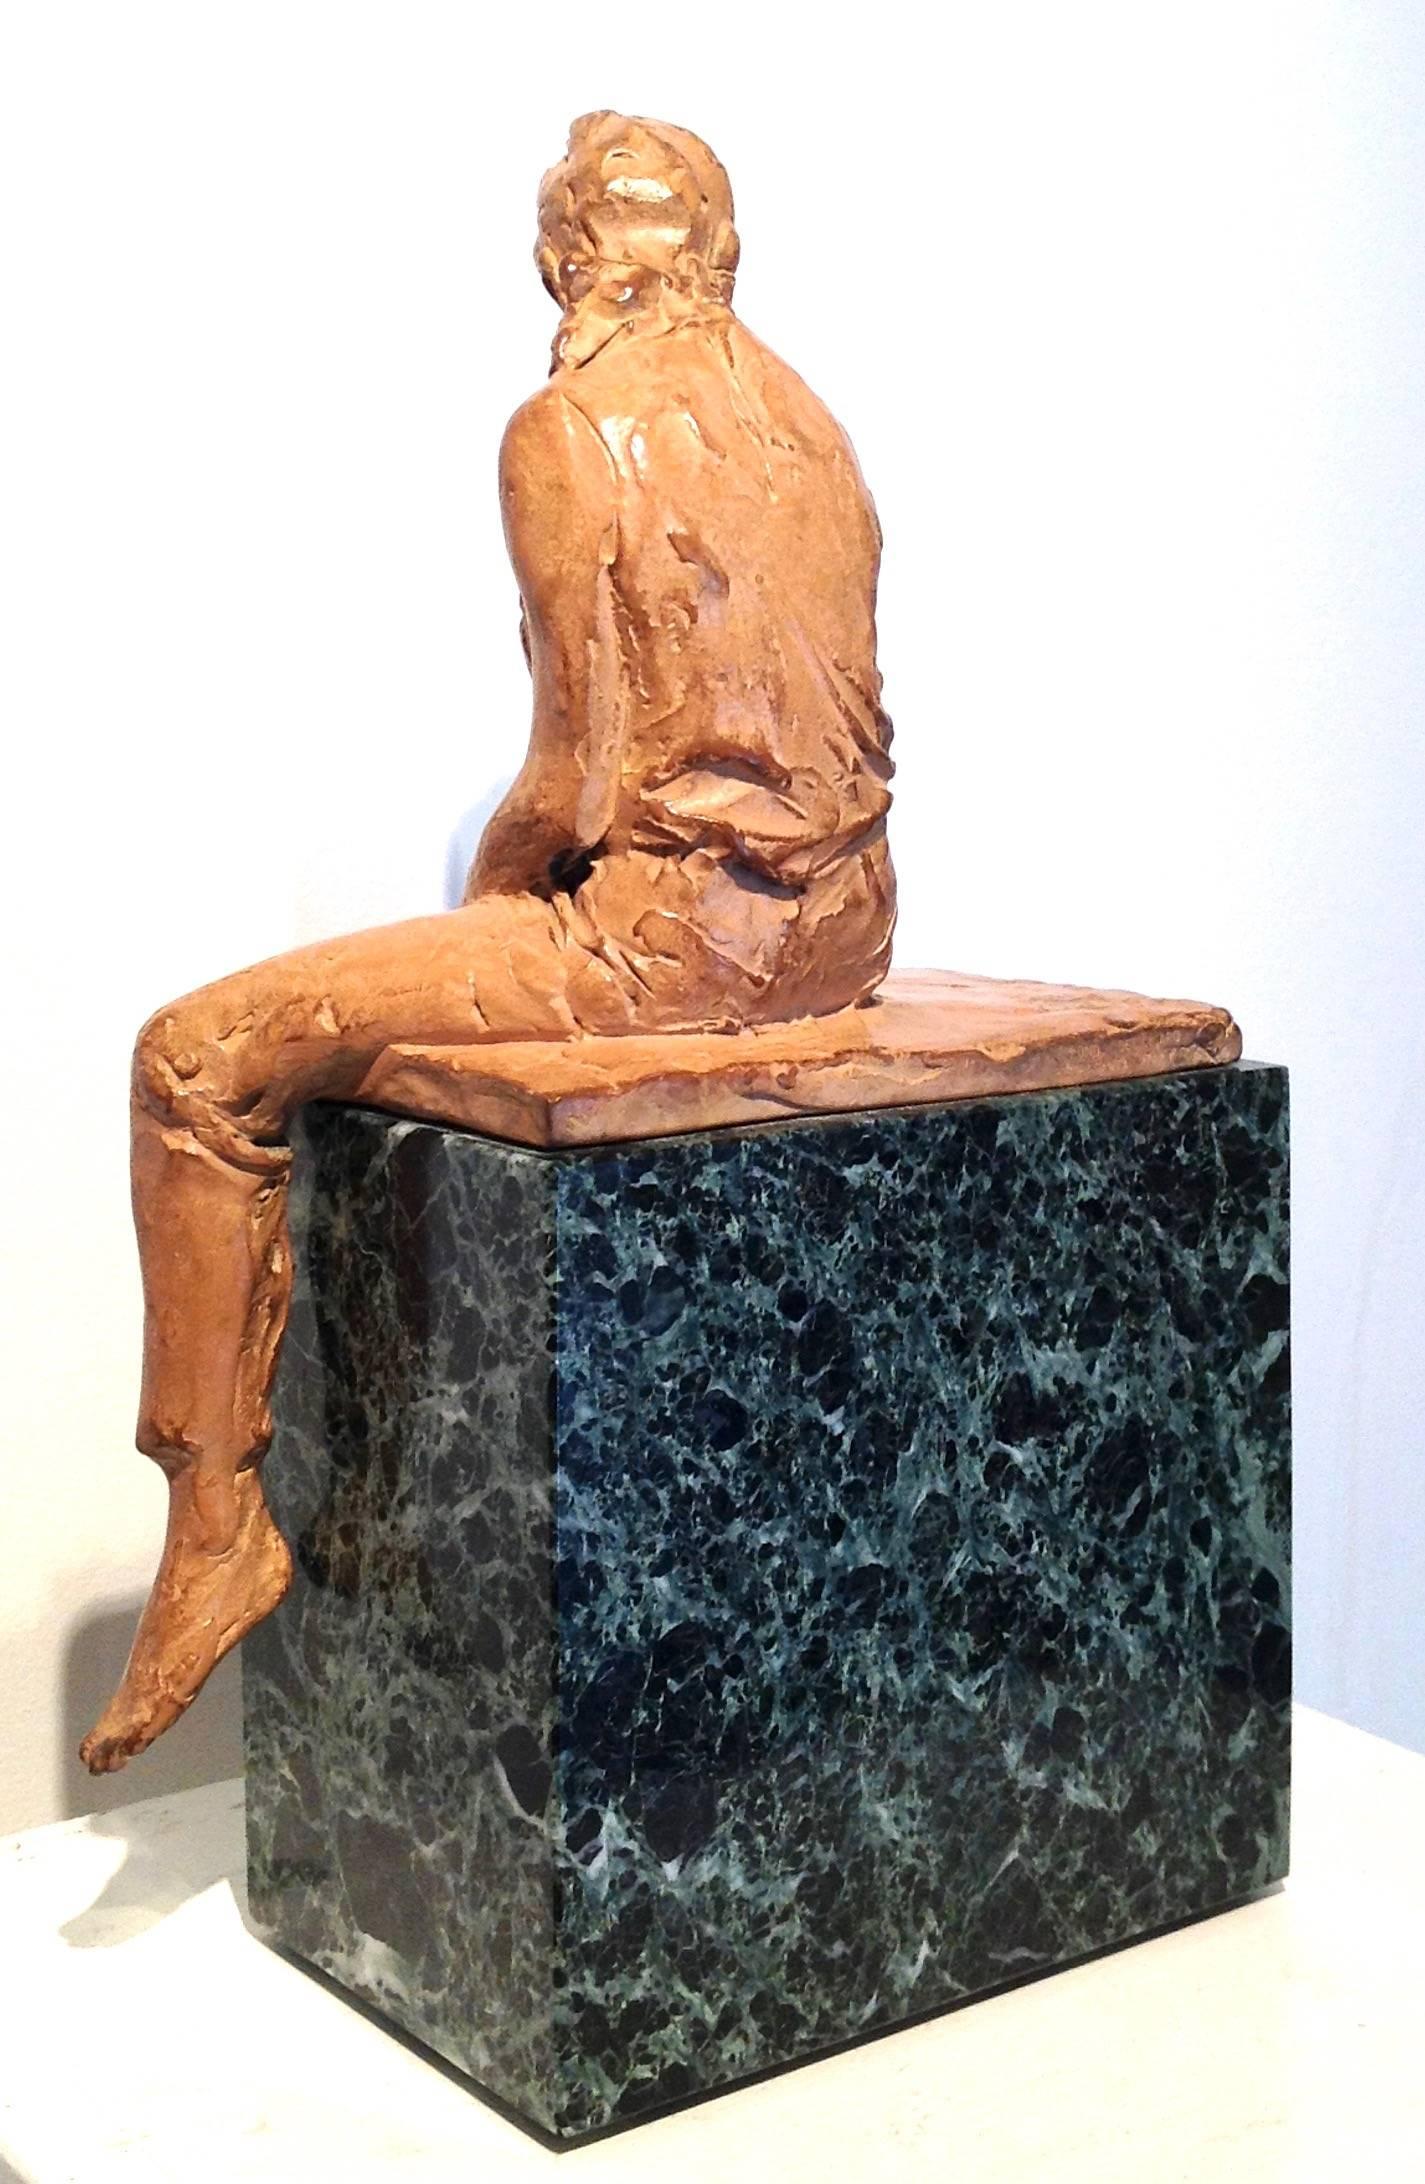 Woman on the Counter - Gold Figurative Sculpture by Stanley Bleifeld